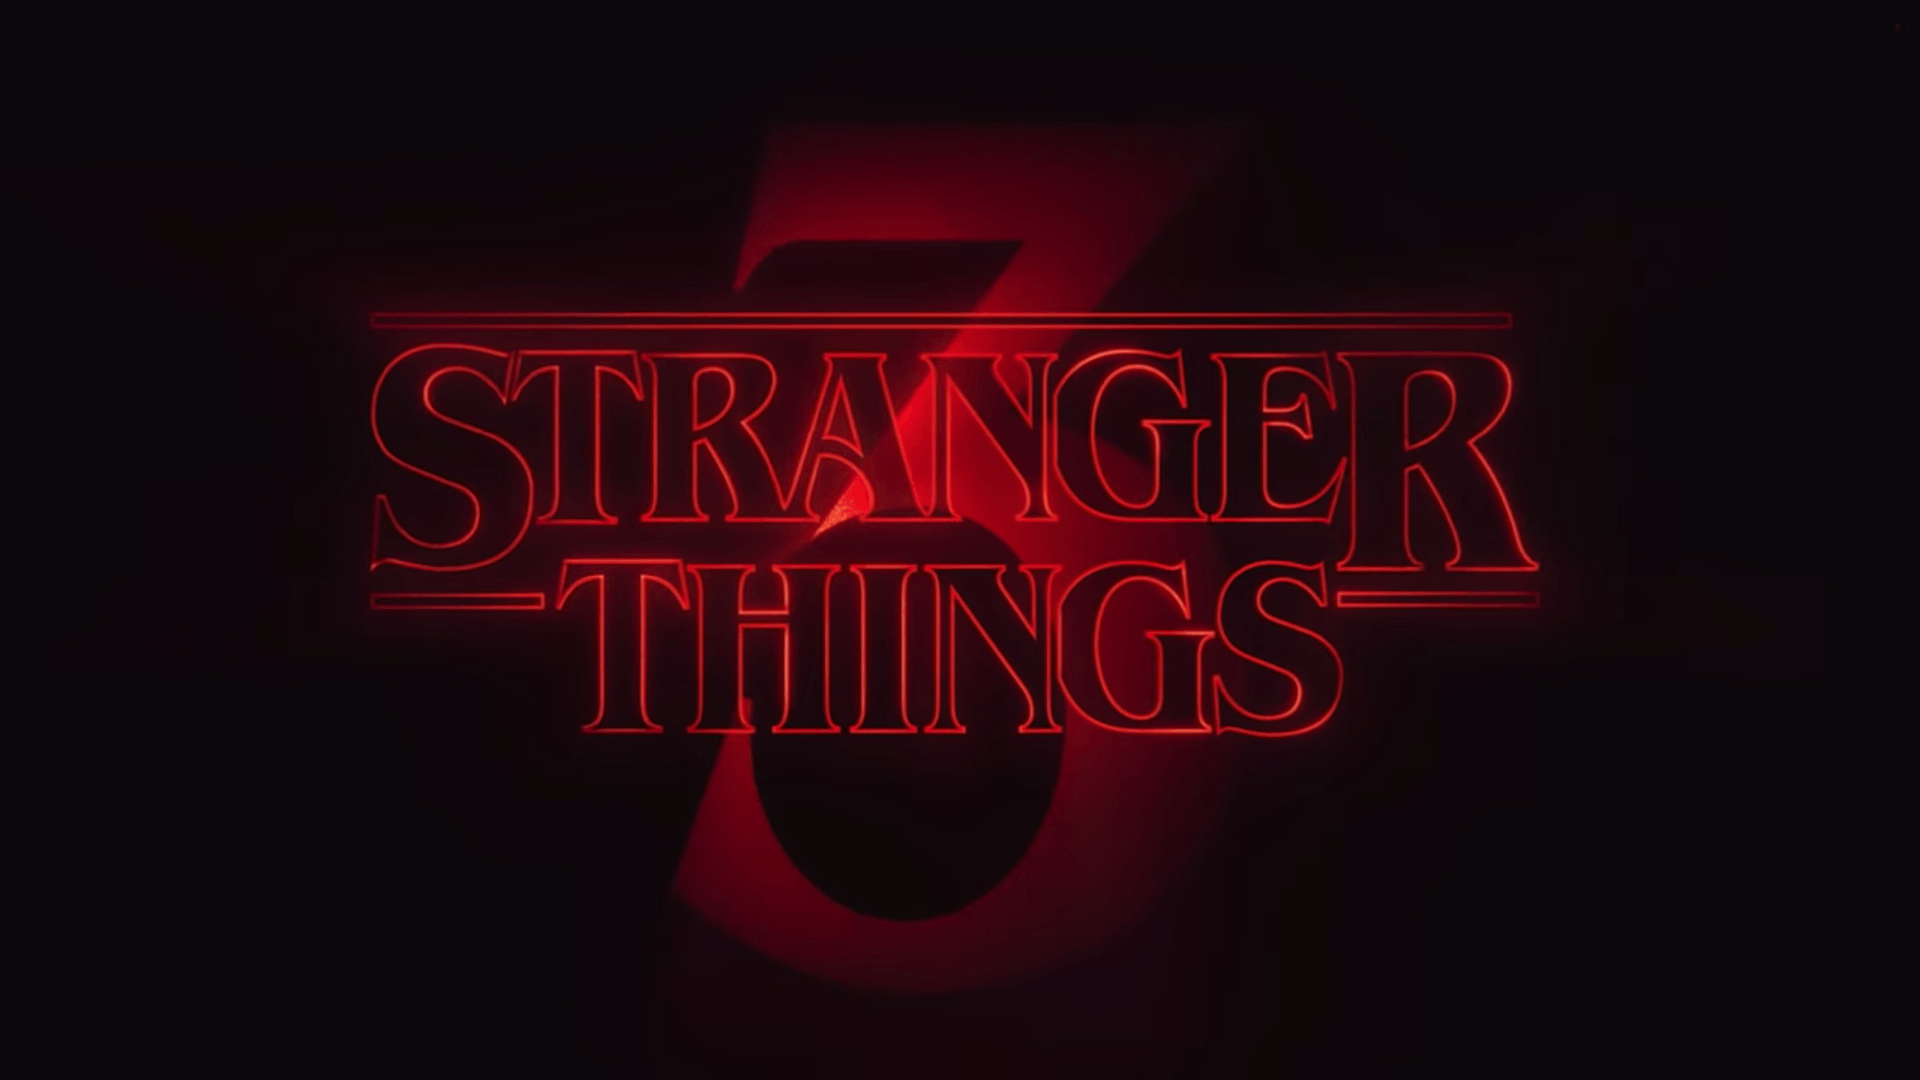 Stranger Things' Season 3 has an official release date and it's